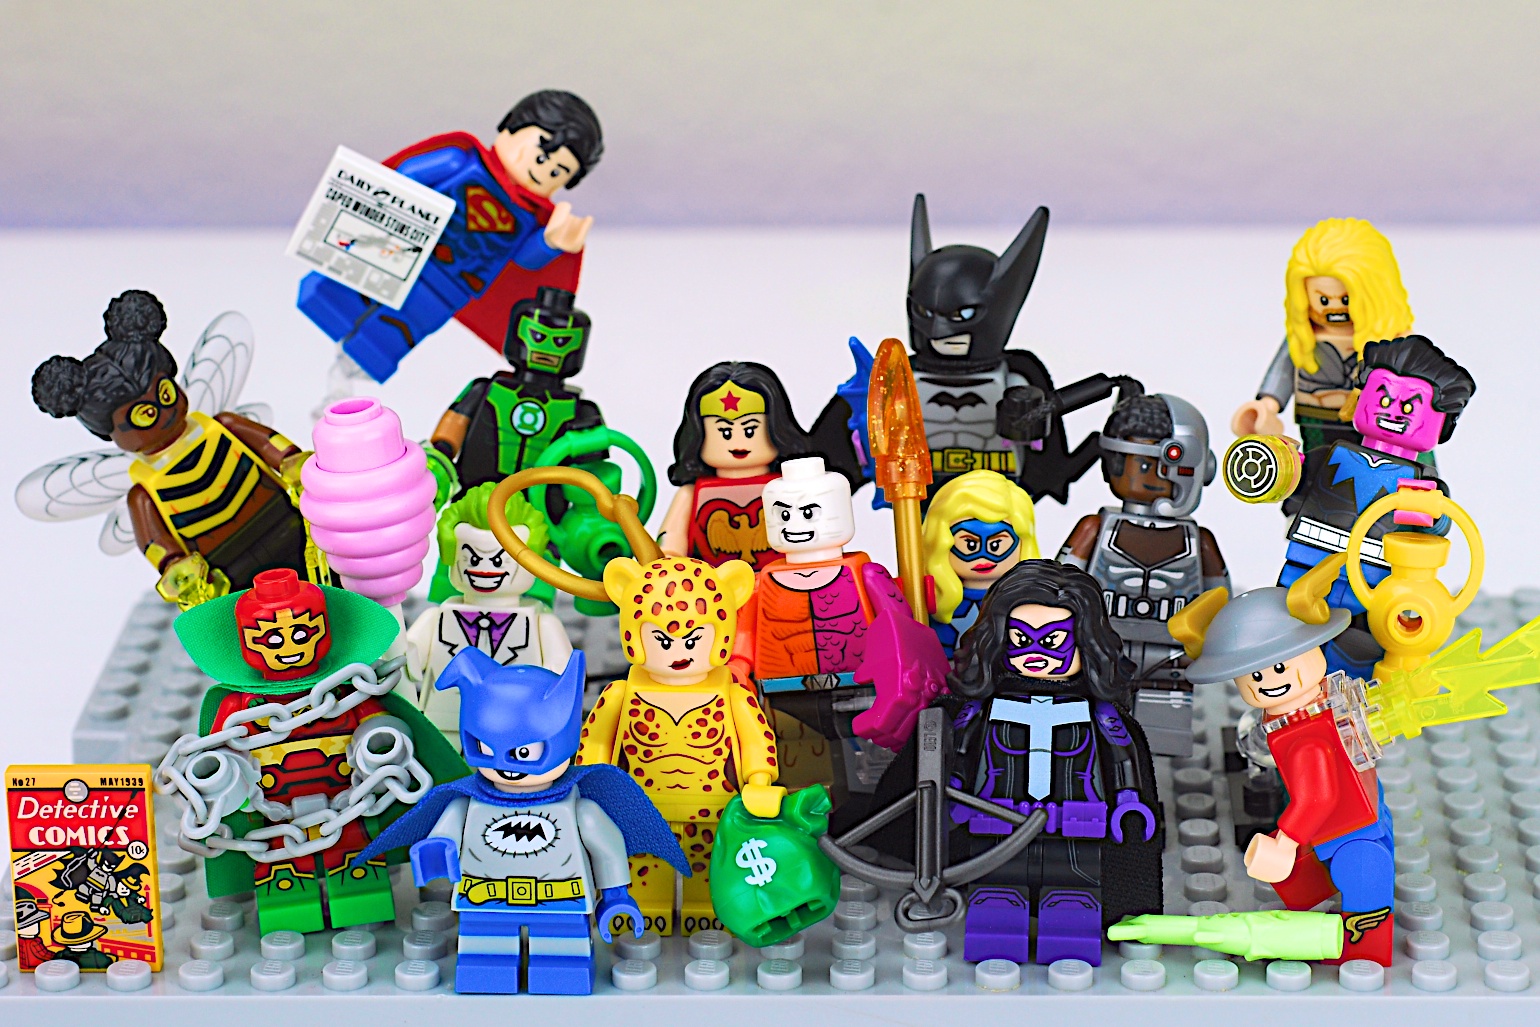 DC Minifigures – Complete set of all 16 